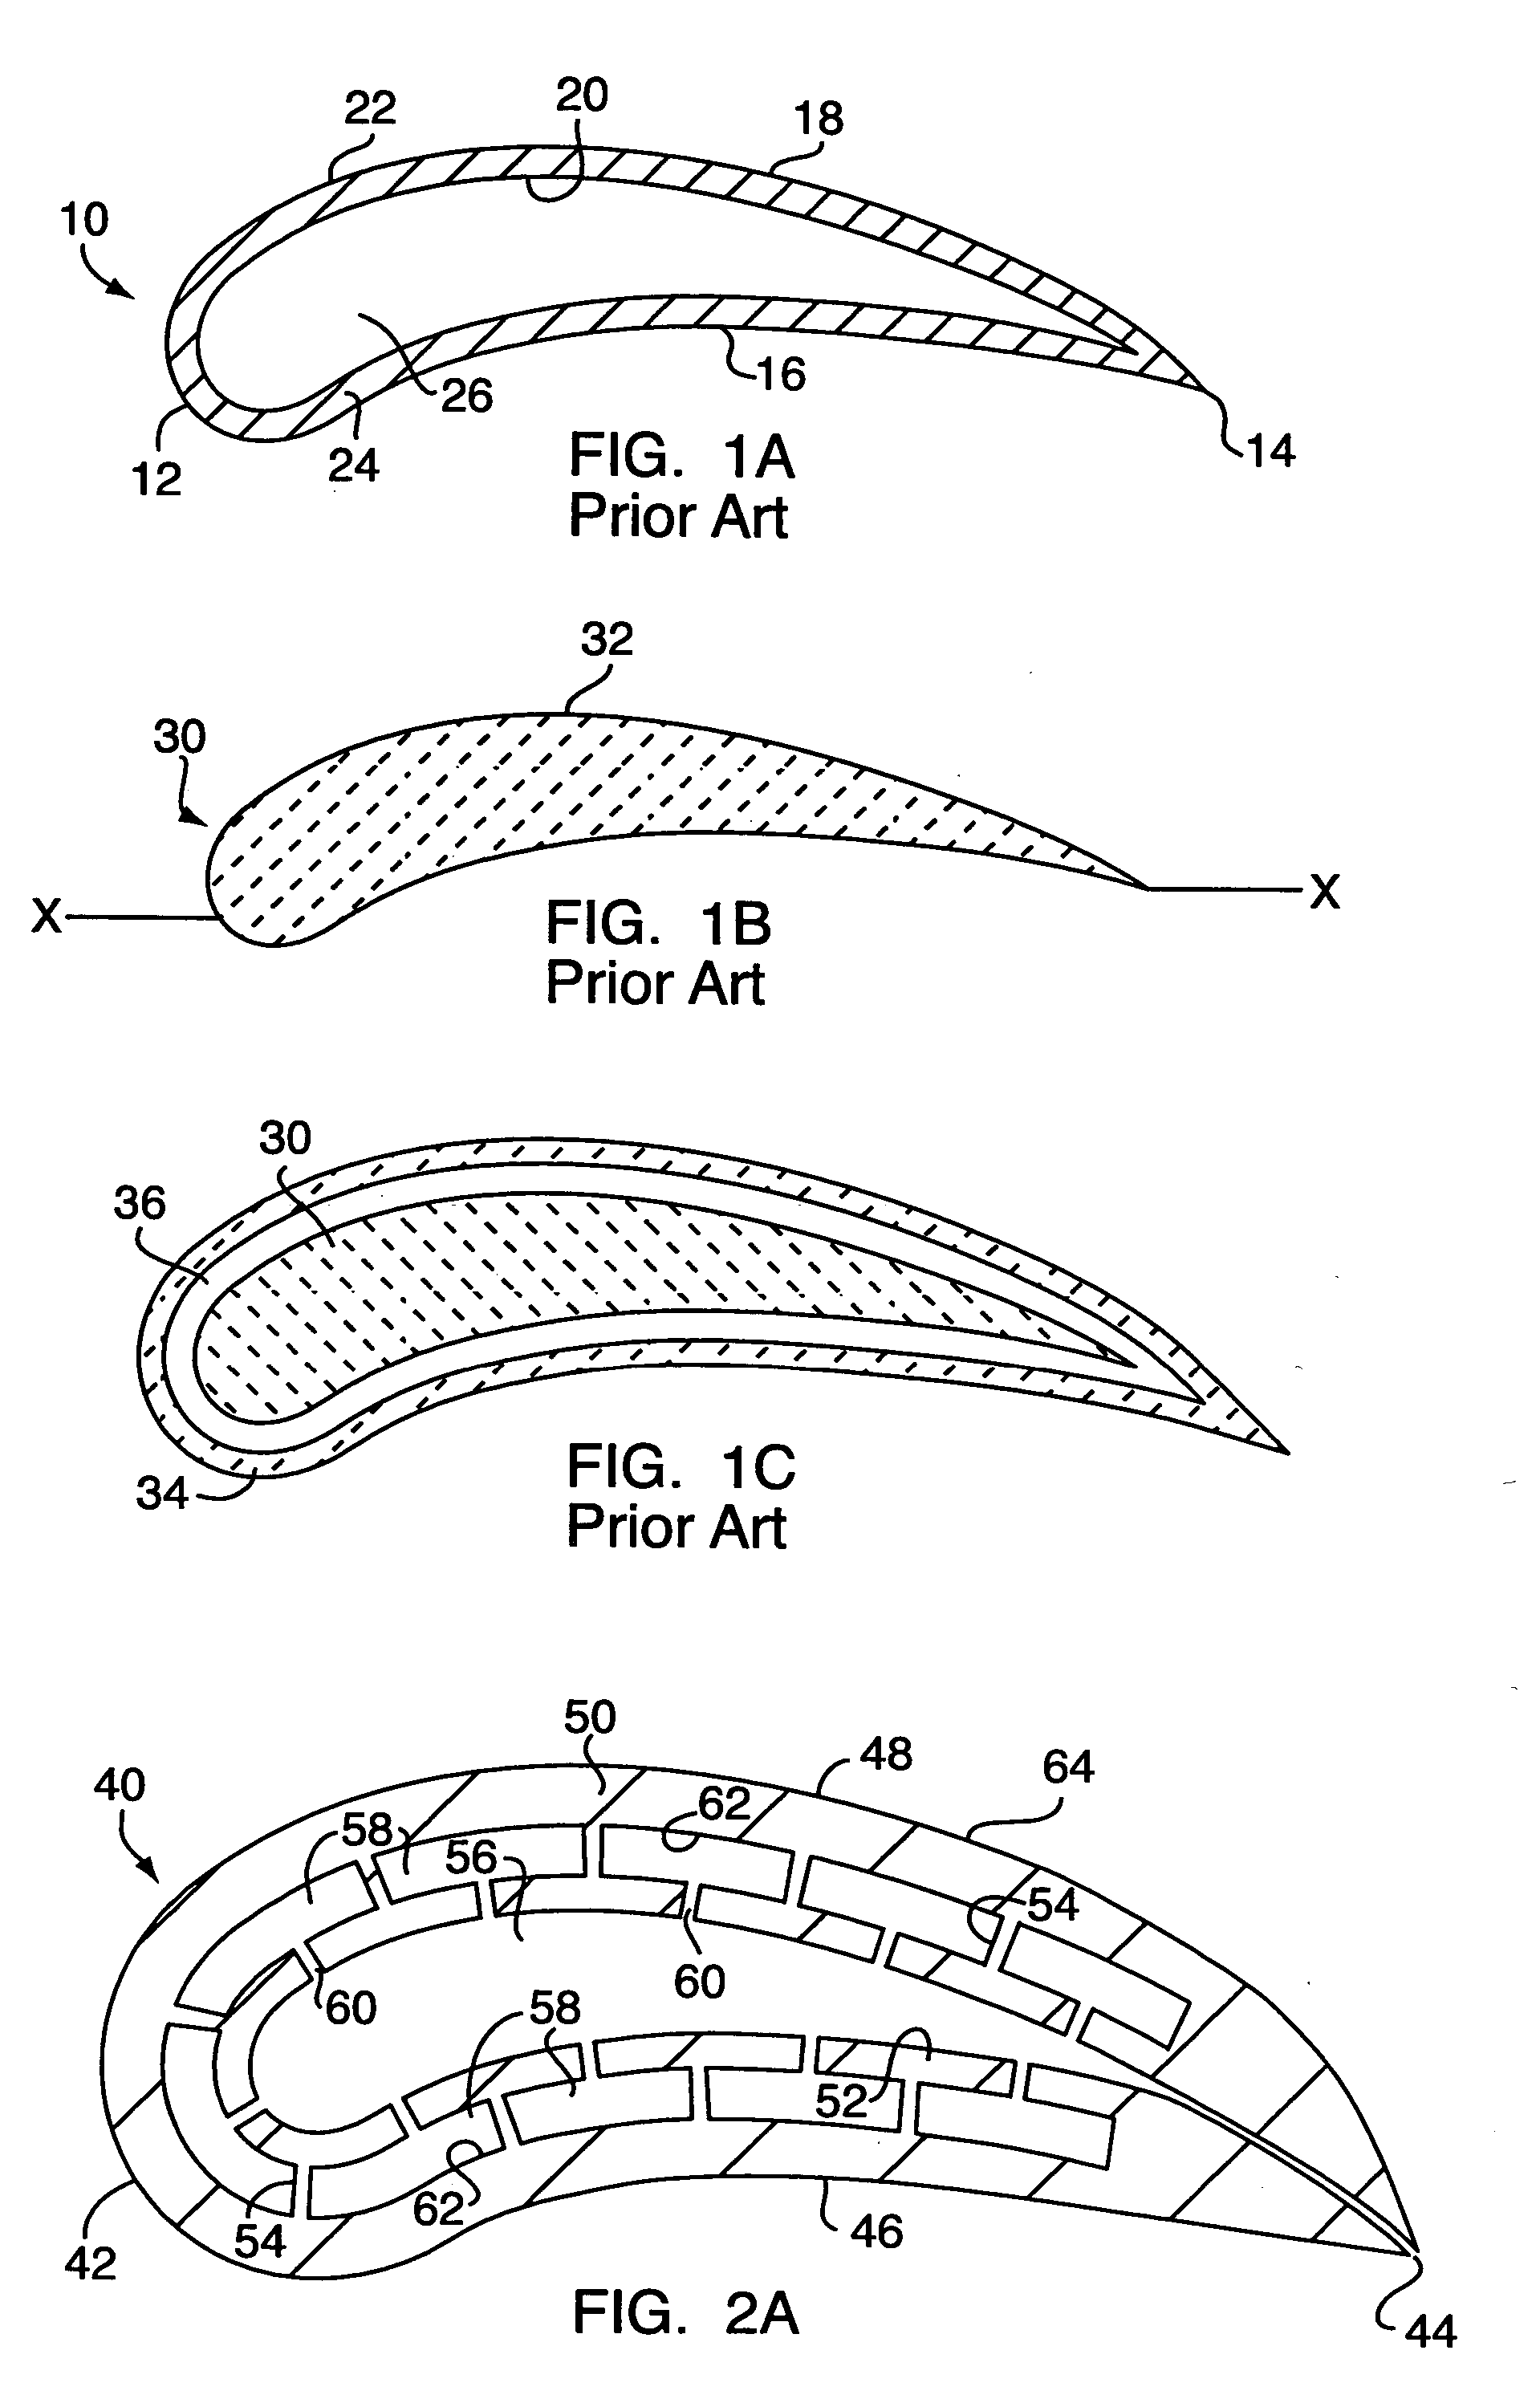 Method of producing unitary multi-element ceramic casting cores and integral core/shell system